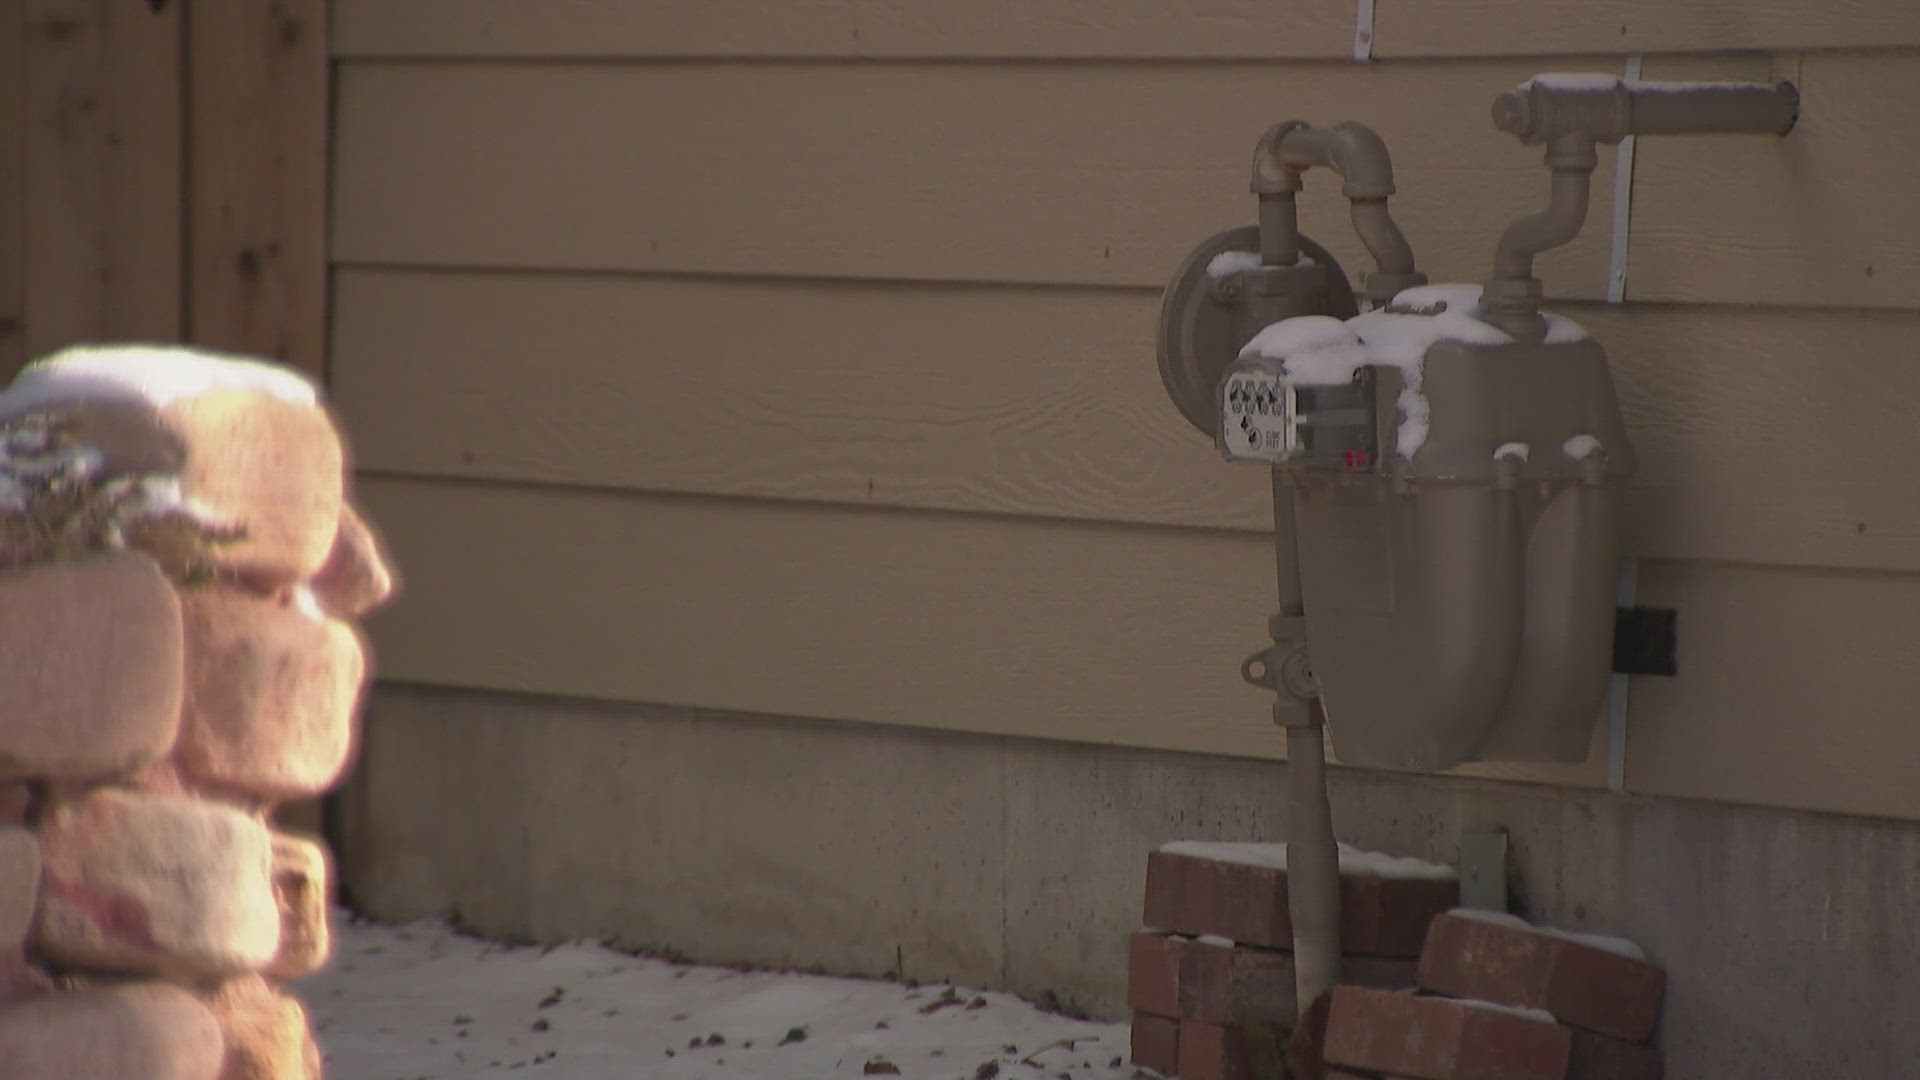 Multiple Denver metro area agencies were investigating reports of widespread natural gas or sewage odors Sunday morning.